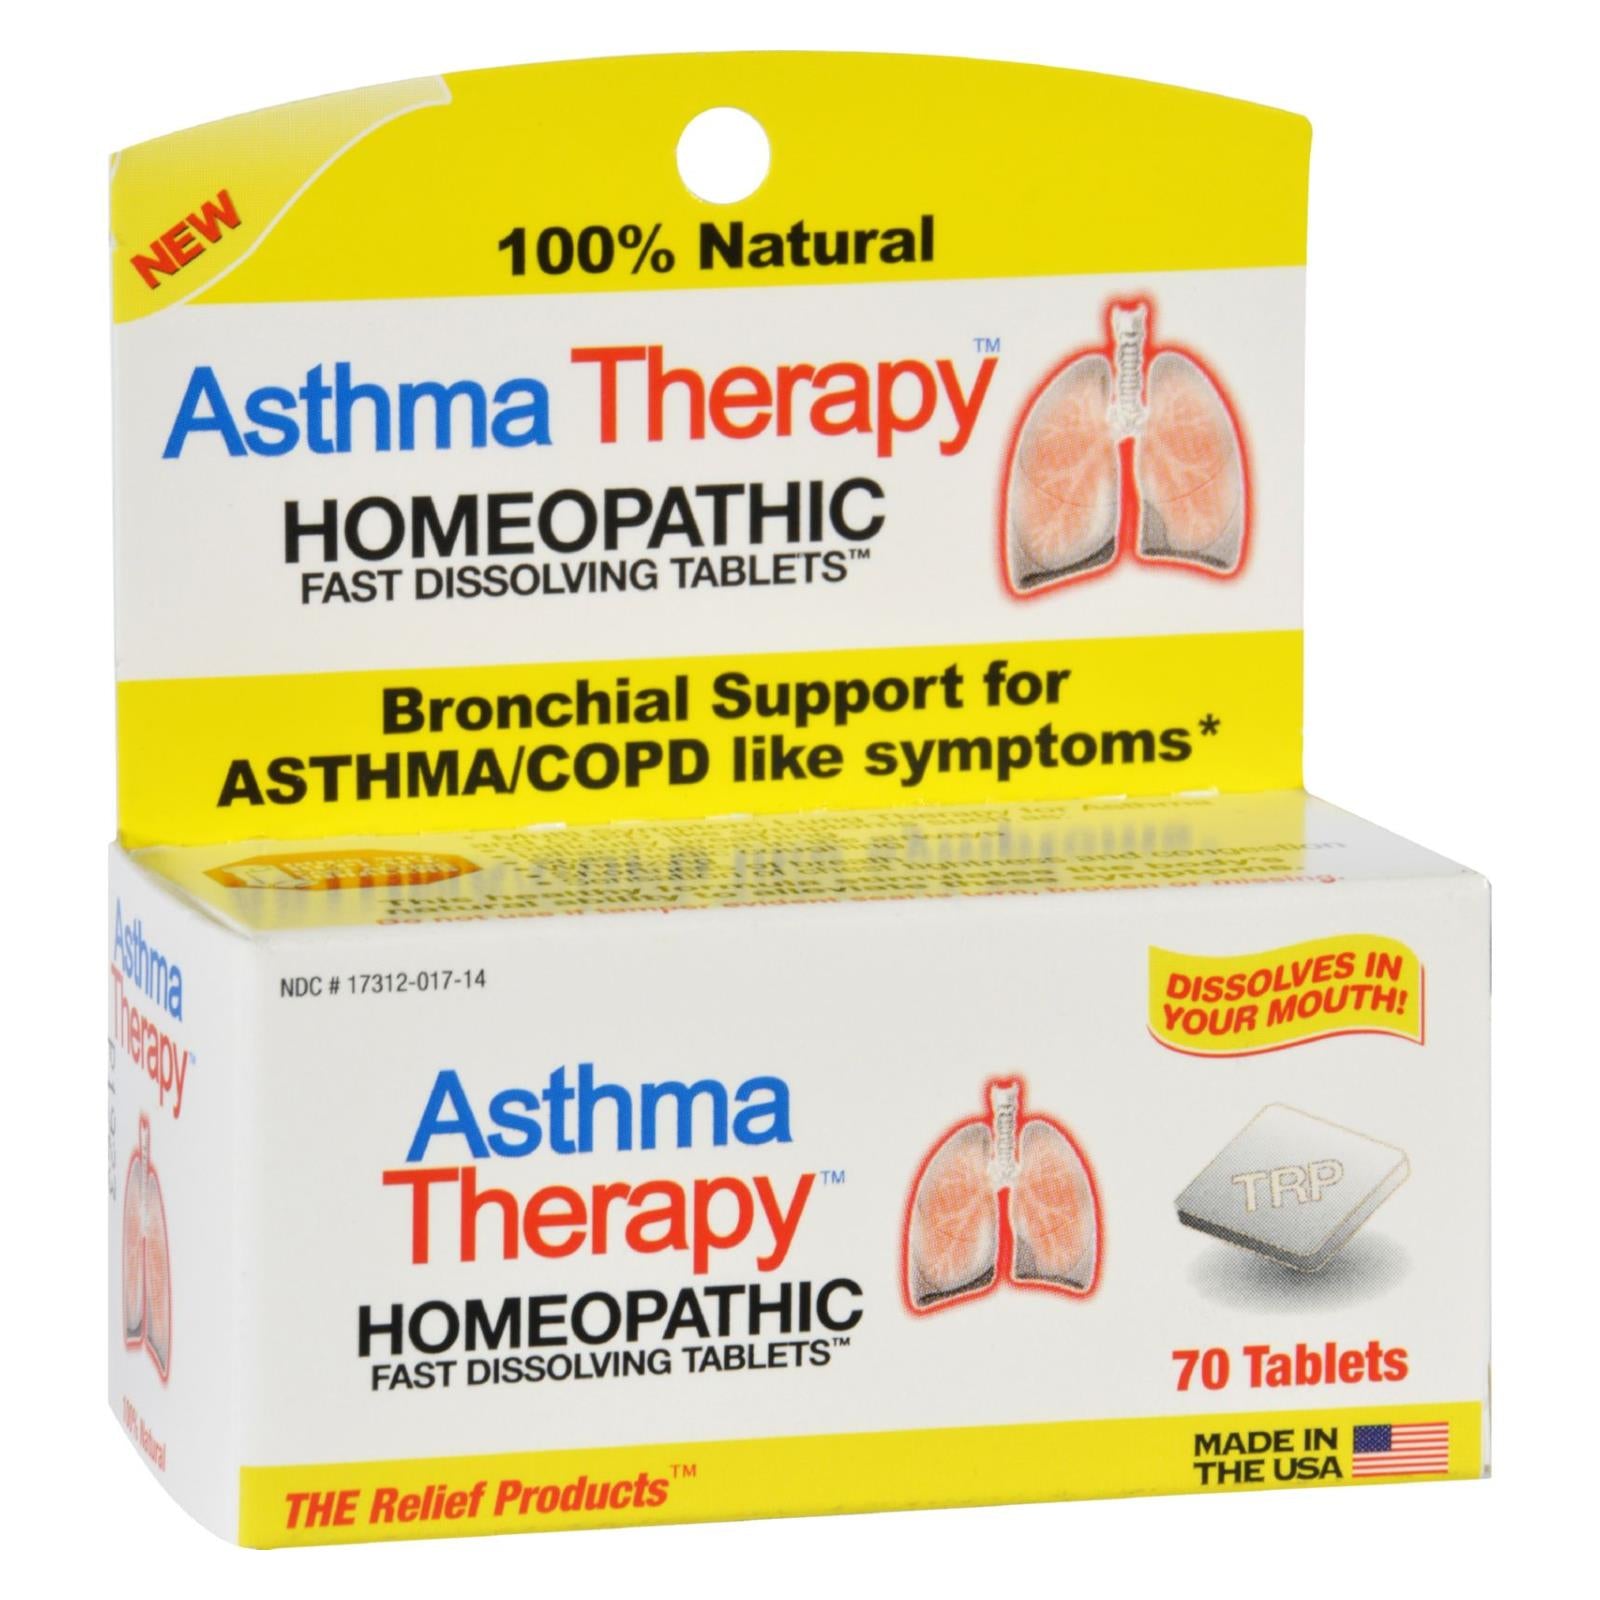 Trp Asthma Therapy - 70 Tablets